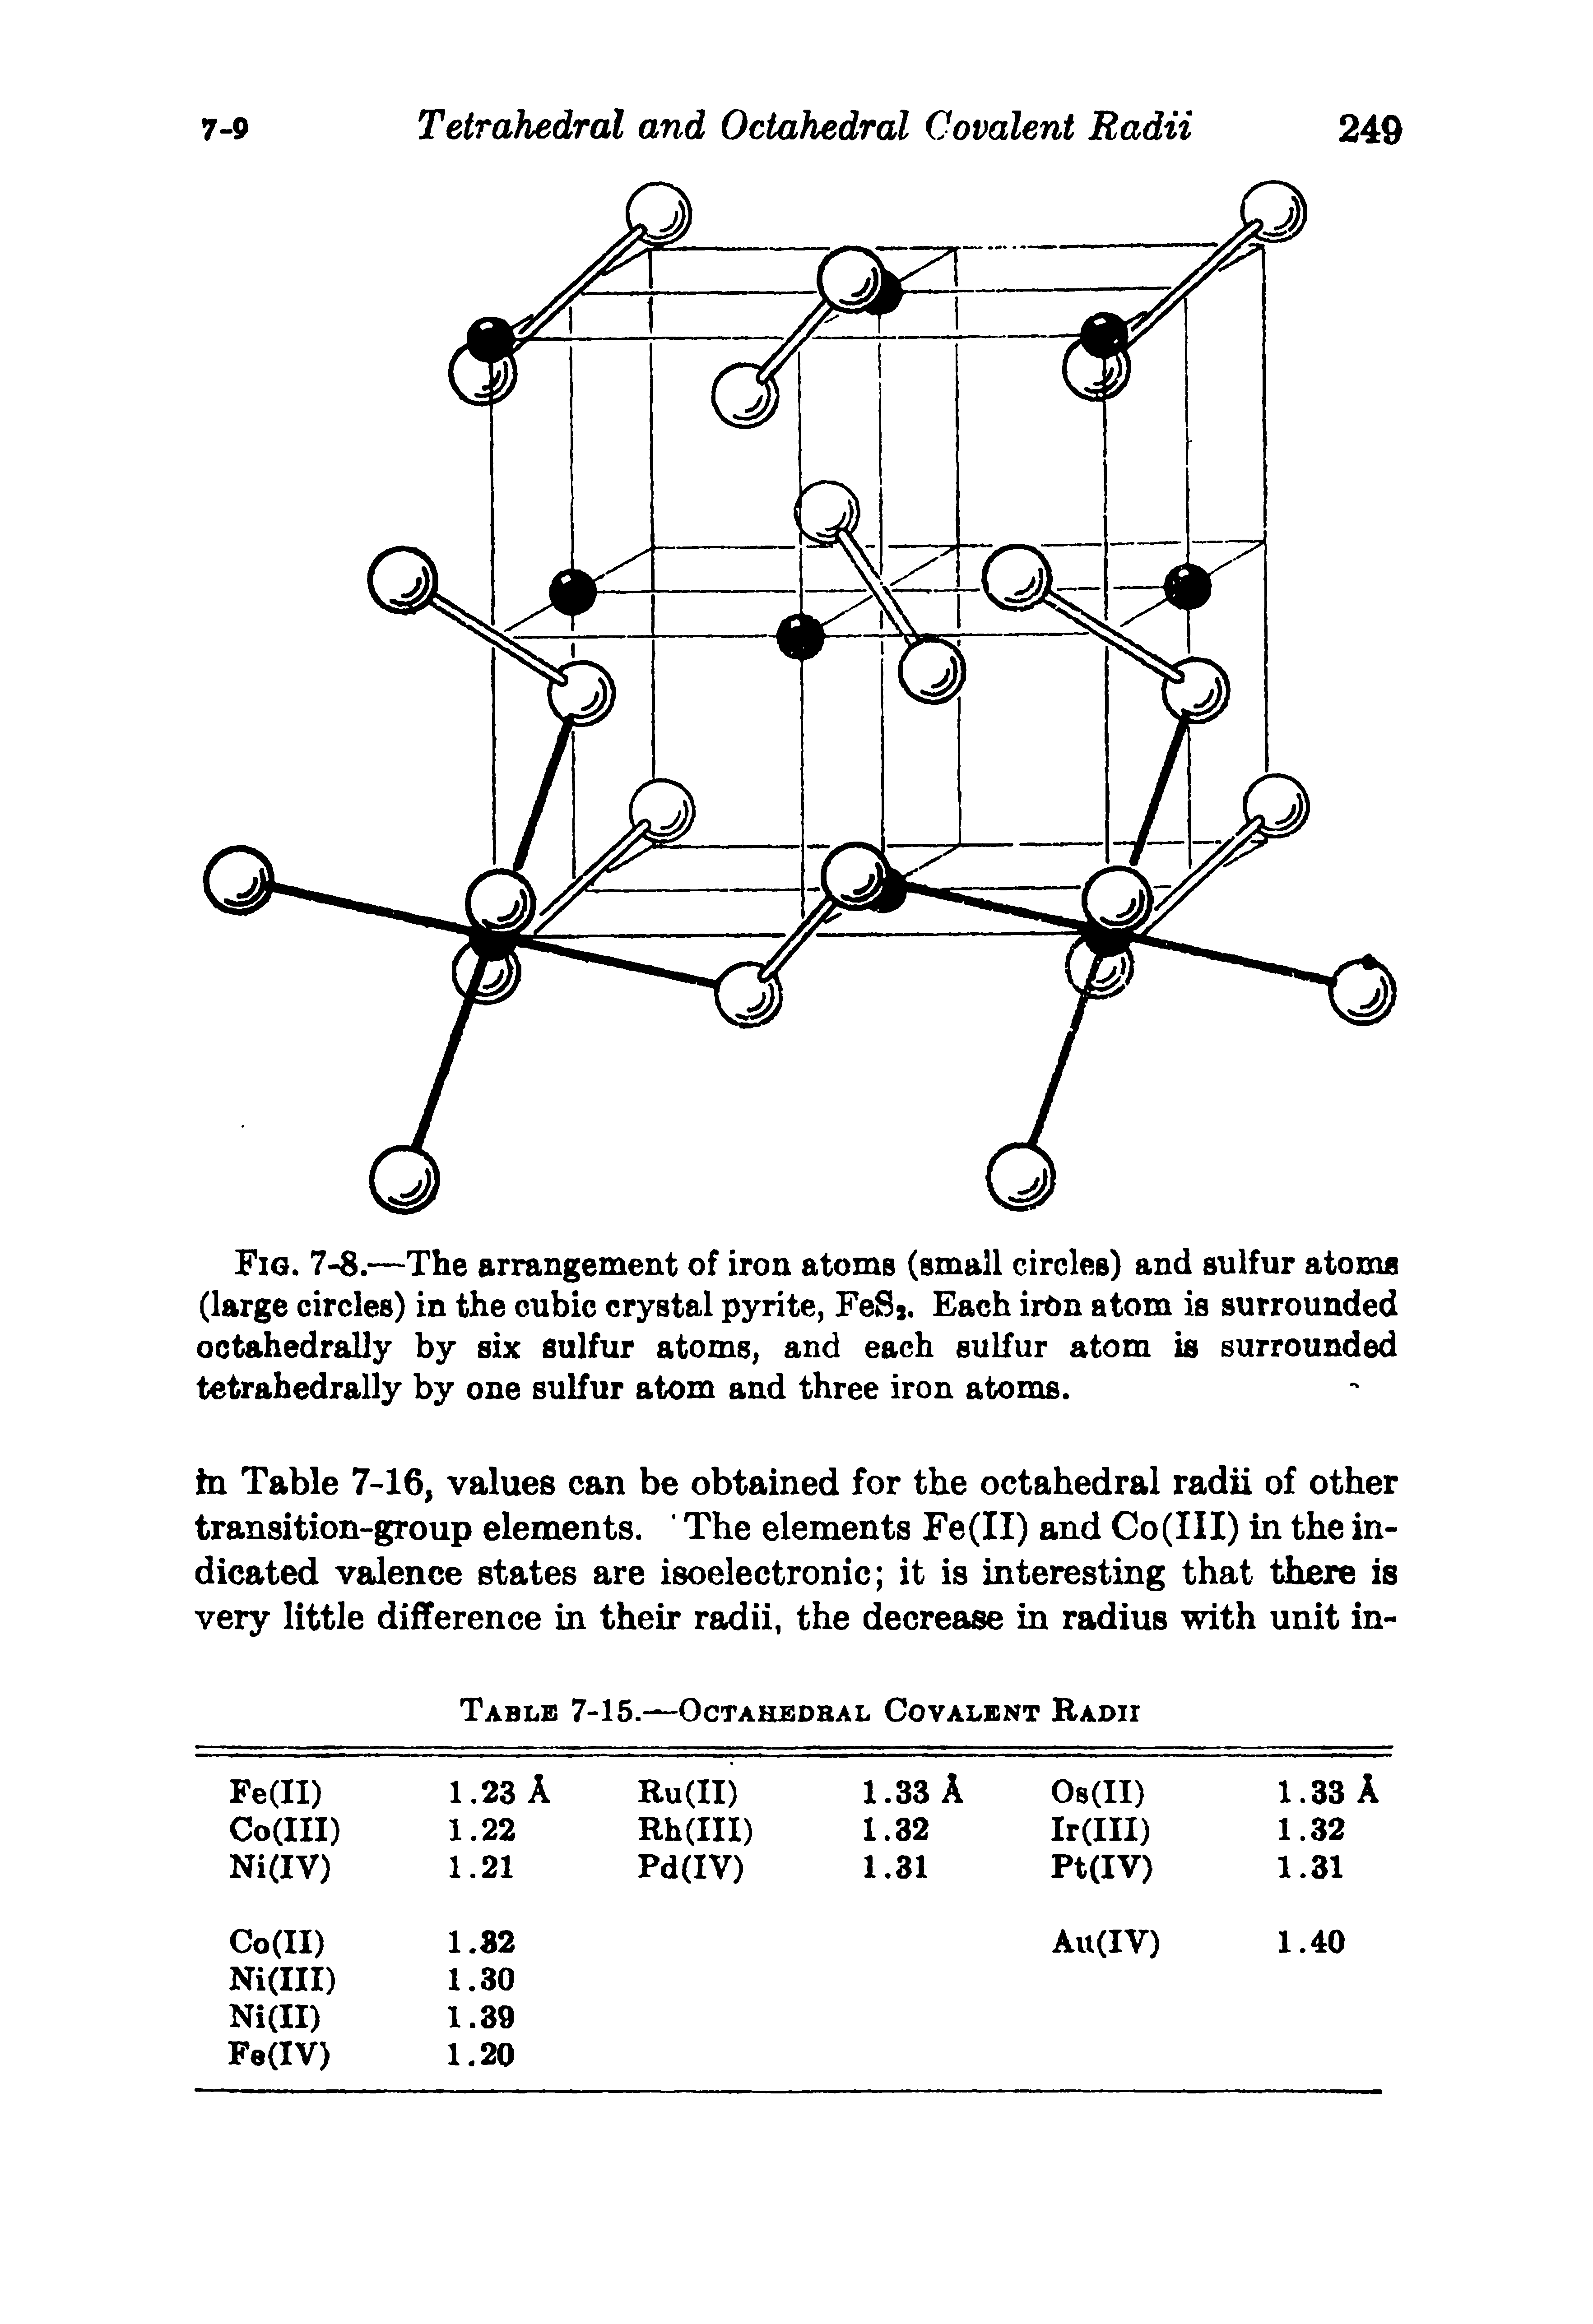 Fig. 7-8.—The arrangement of iron atoms (small circles) and sulfur atoms (large circles) in the cubic crystal pyrite, FeS. Each iron atom is surrounded octahedrally by six sulfur atoms, and each sulfur atom is surrounded tetrahedrally by one sulfur atom and three iron atoms.